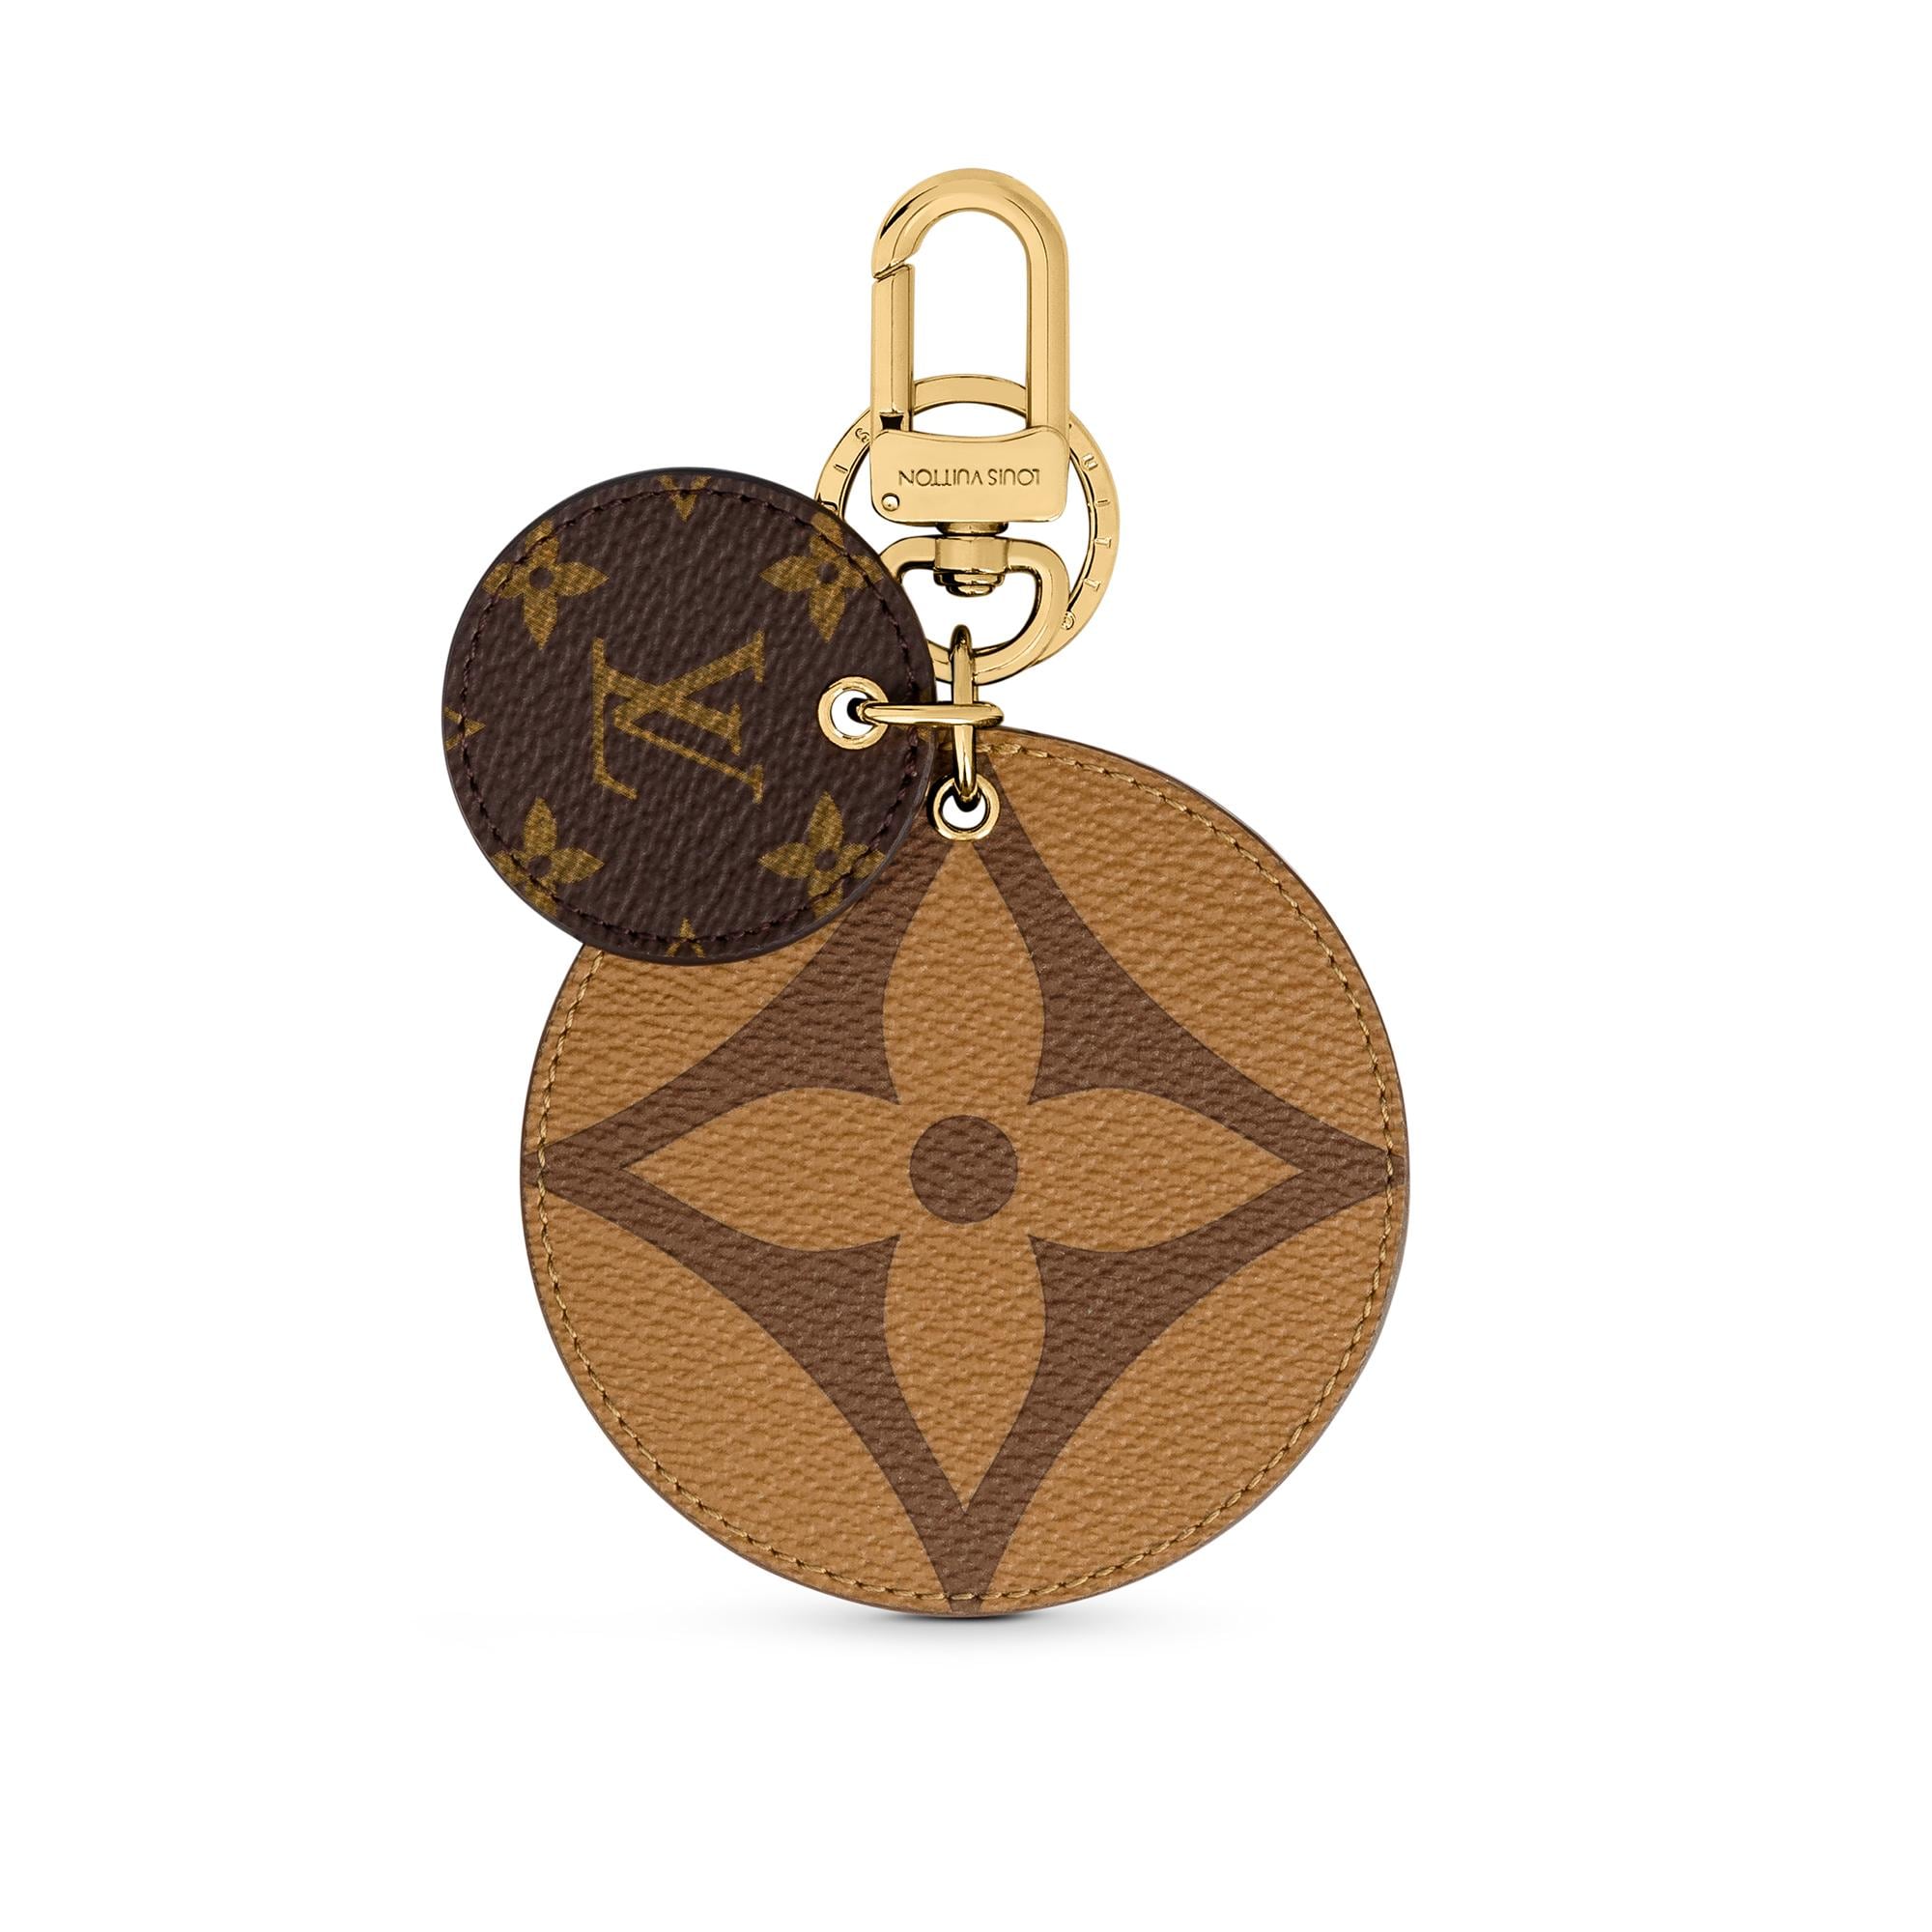 Louis Vuitton Monogram Reverse Key Holder and Bag Charm in Brown – Accessories M69317